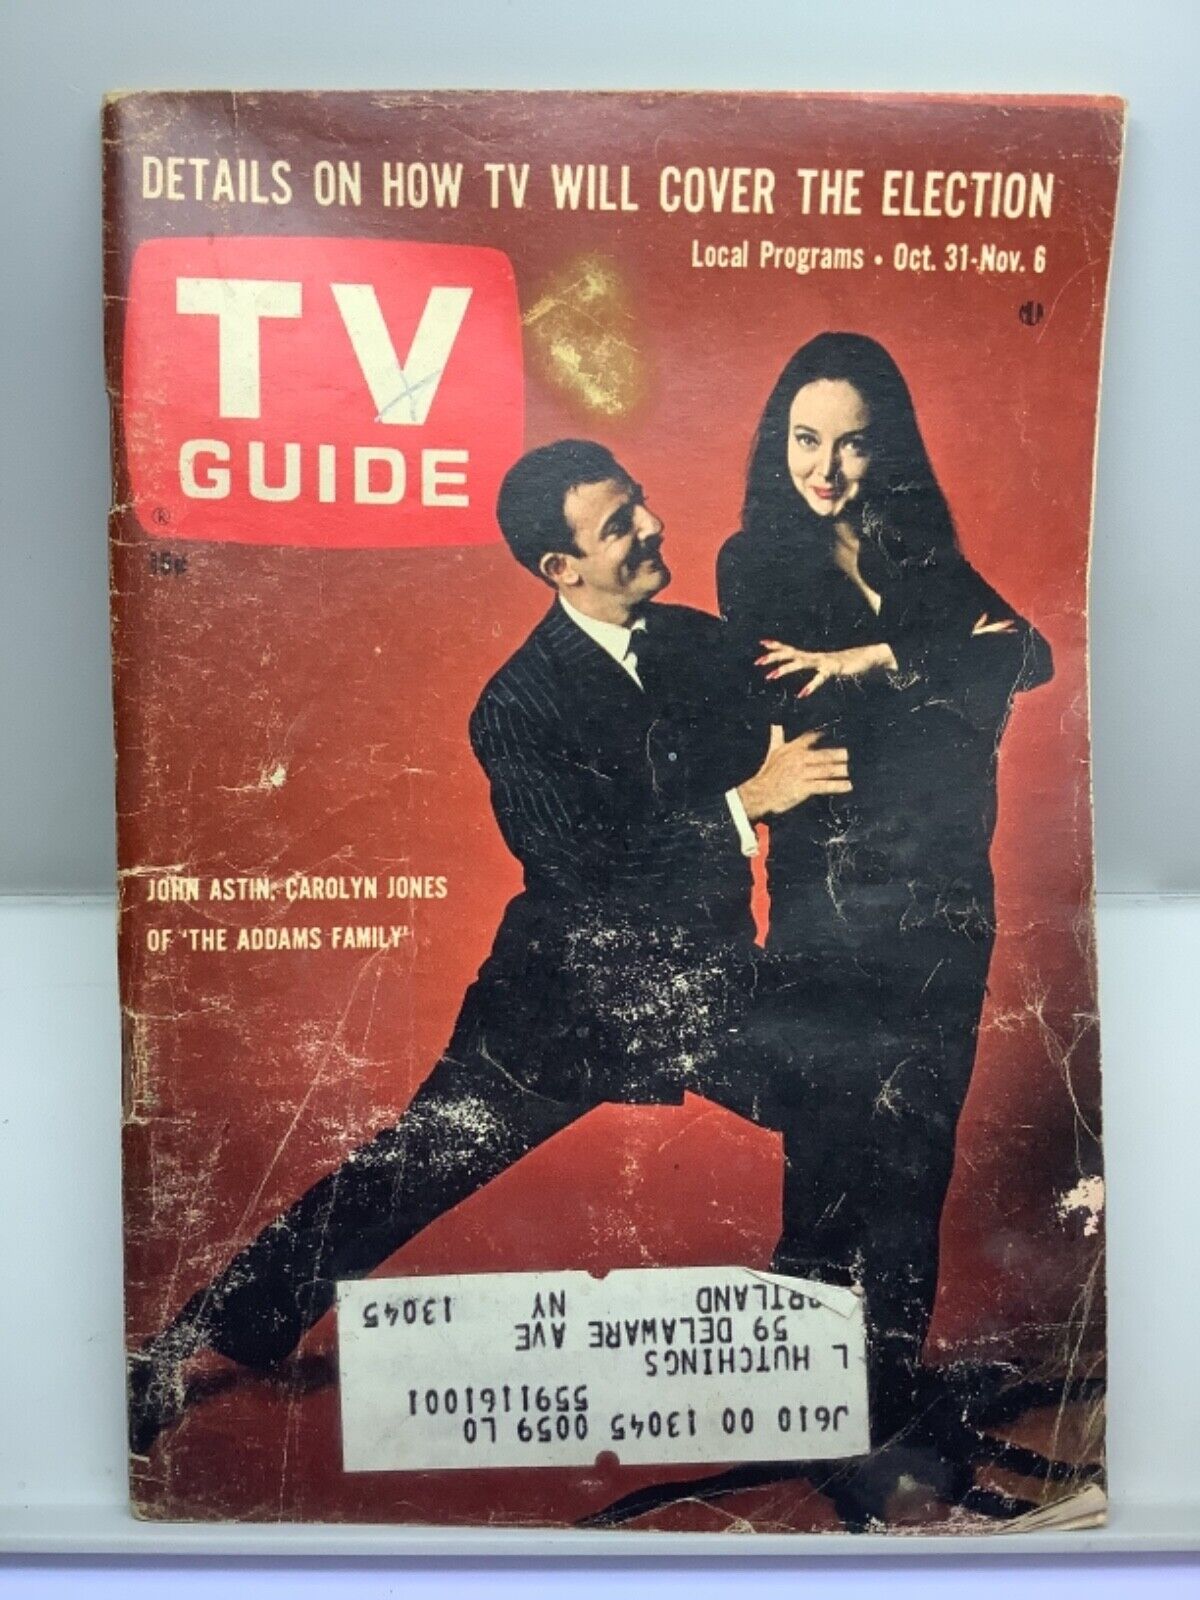 TV Guide October 31, 1964. Addams Family, John Astin. New York State Edition